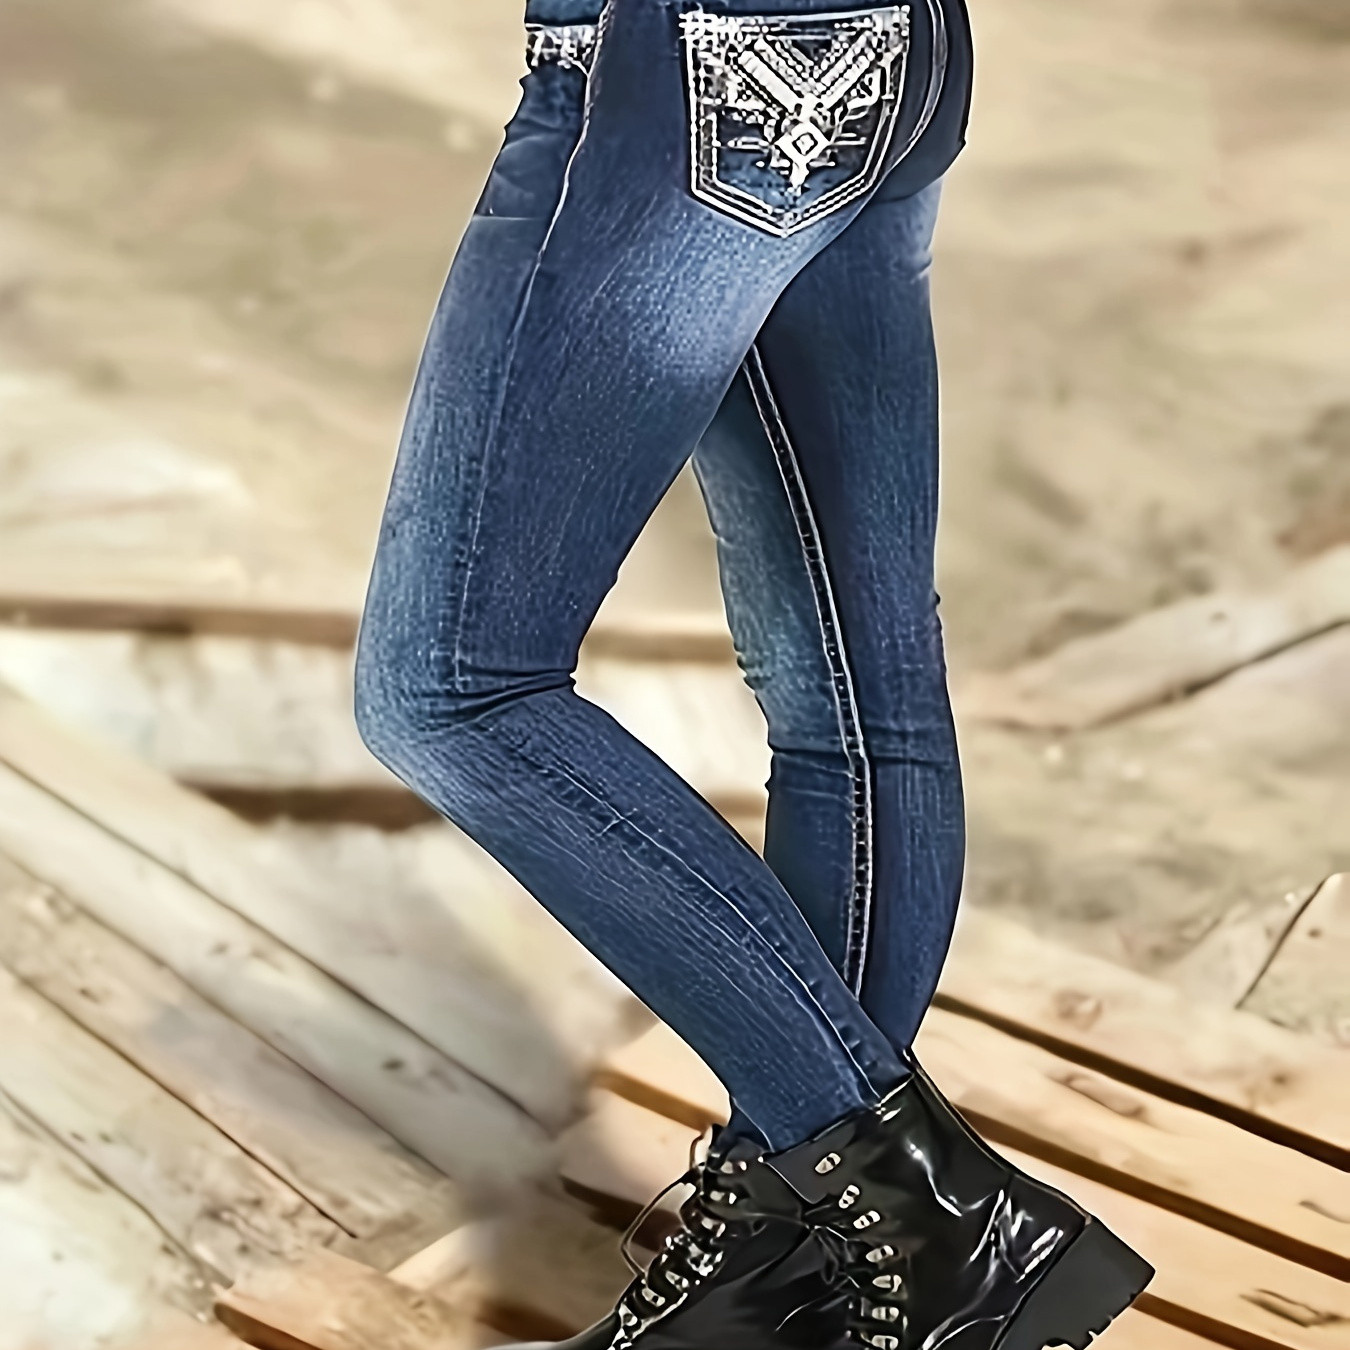 

Women's Stretchy Embroidered Skinny Jeans, Casual Style, Versatile Denim Pants With Pocket Detail, Fashionable Slim Fit Trousers For Autumn